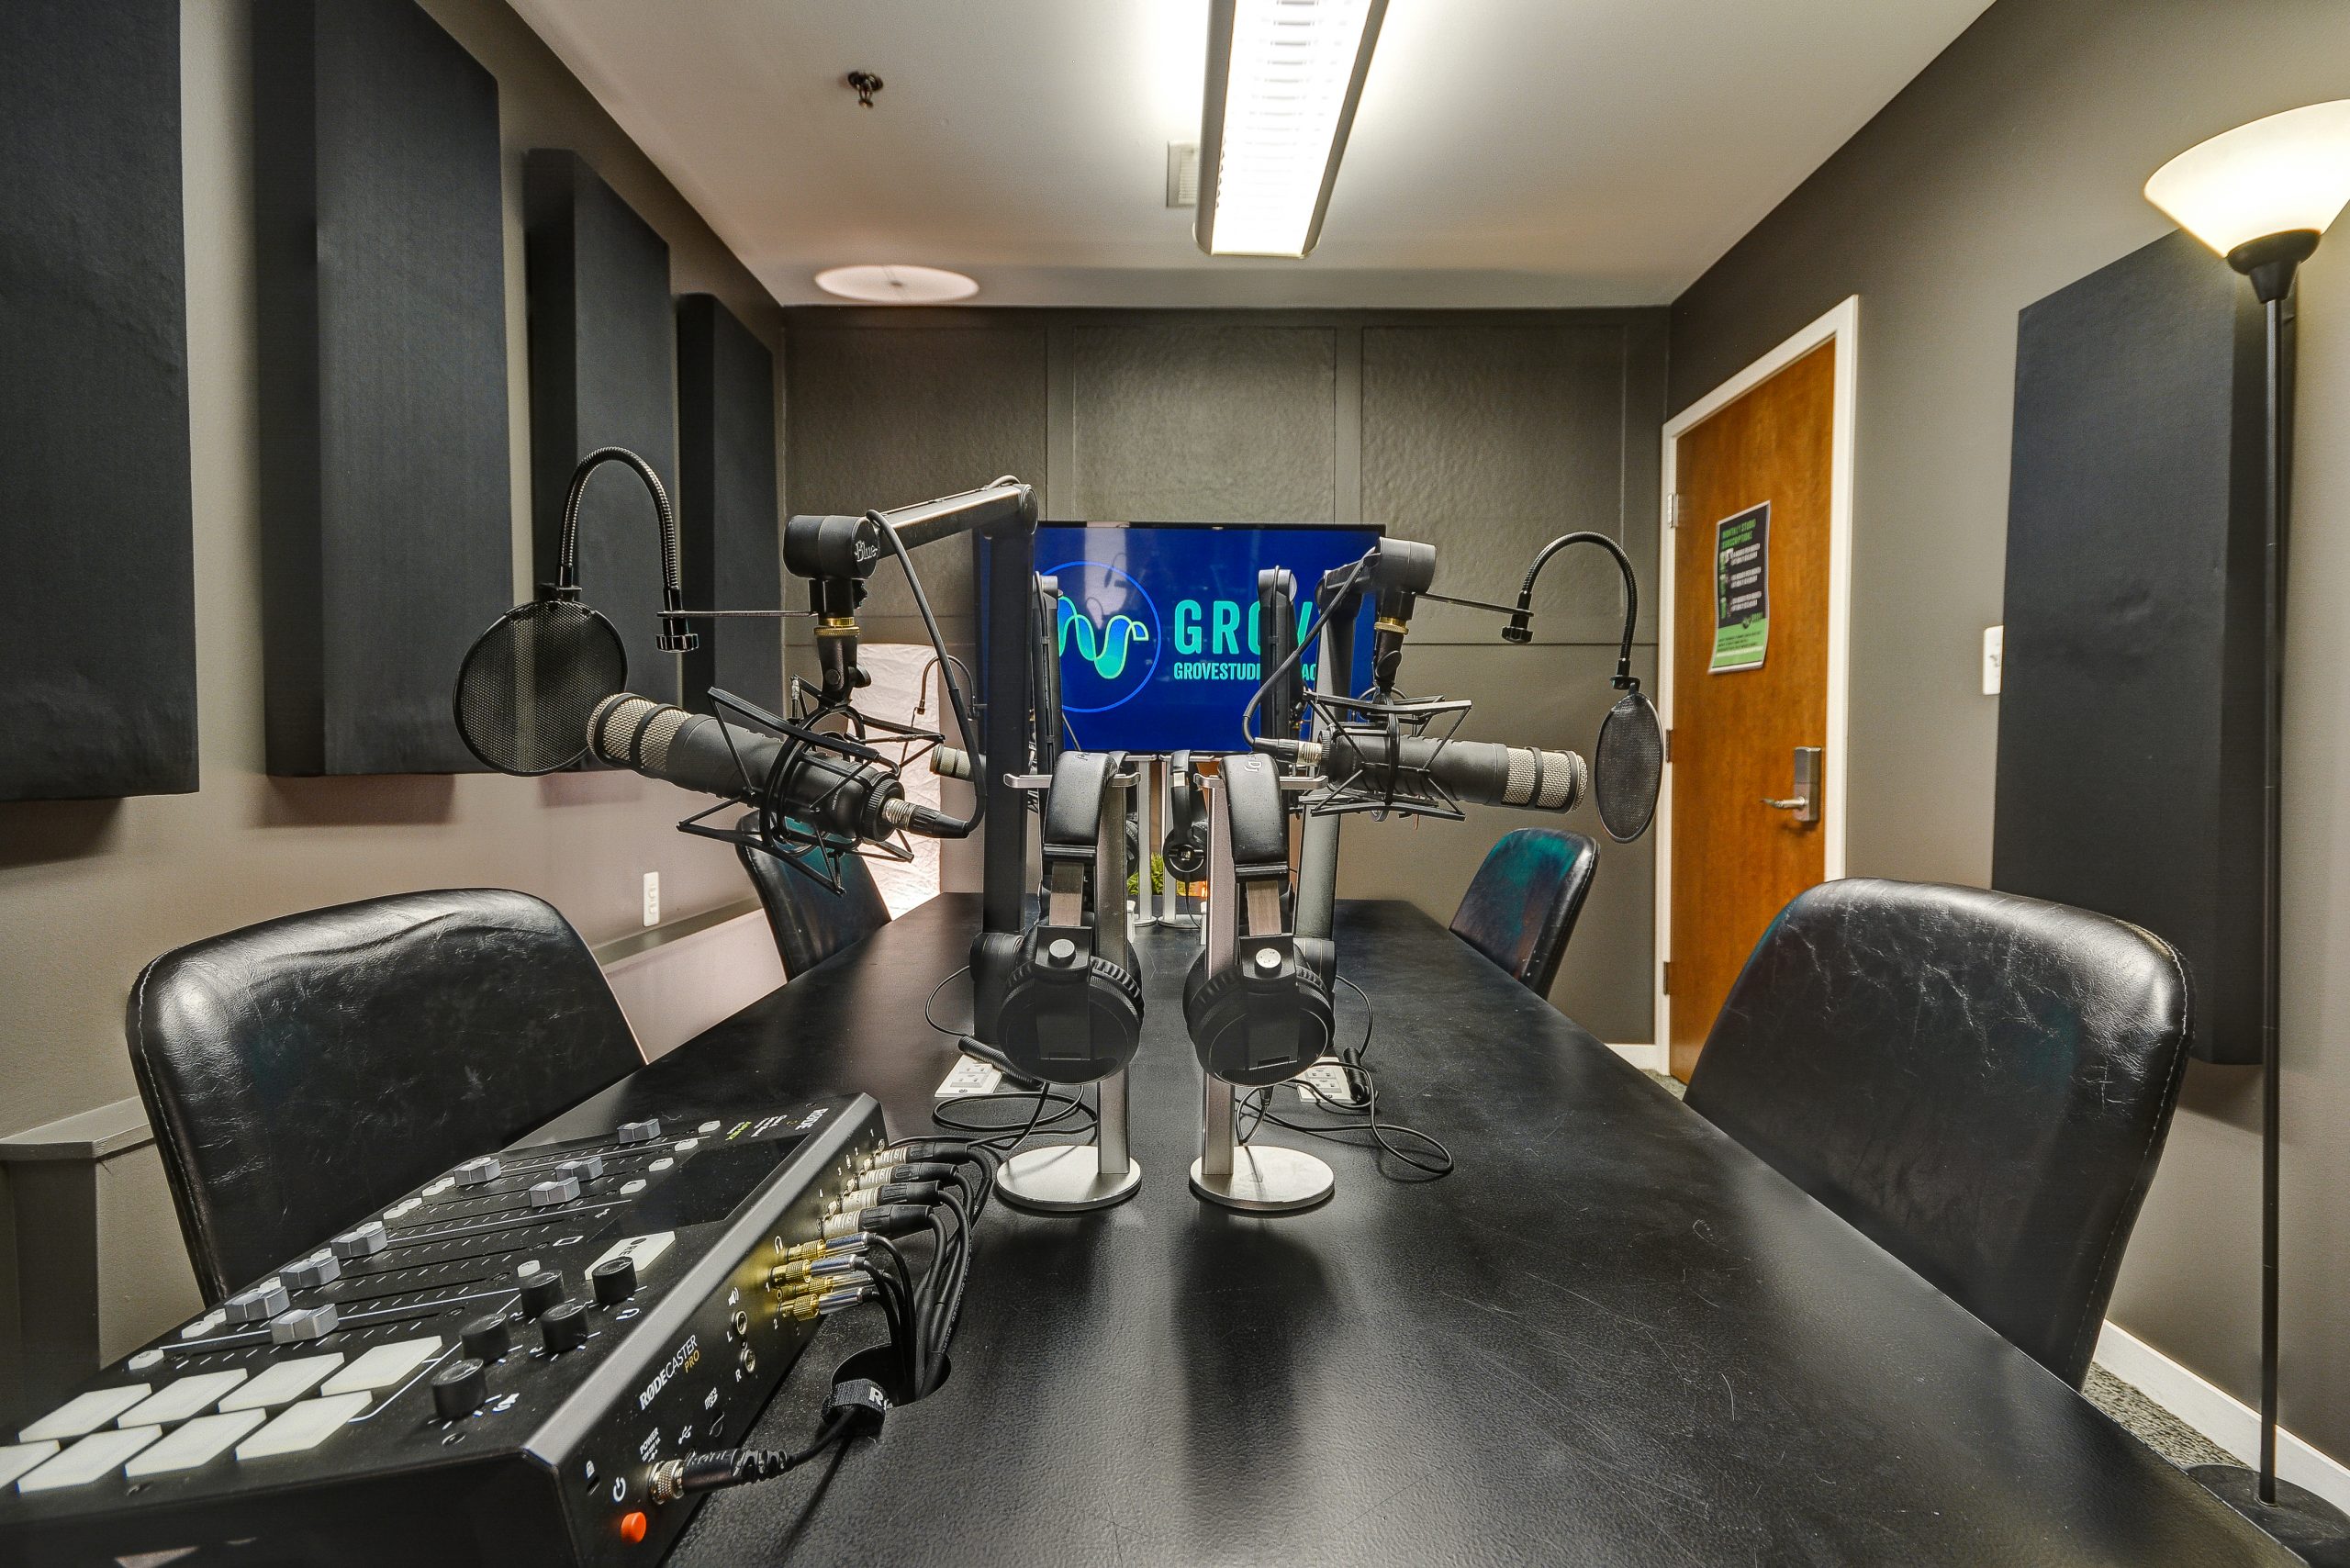 Easy All-In-One Podcast Space  Rent this location on Giggster